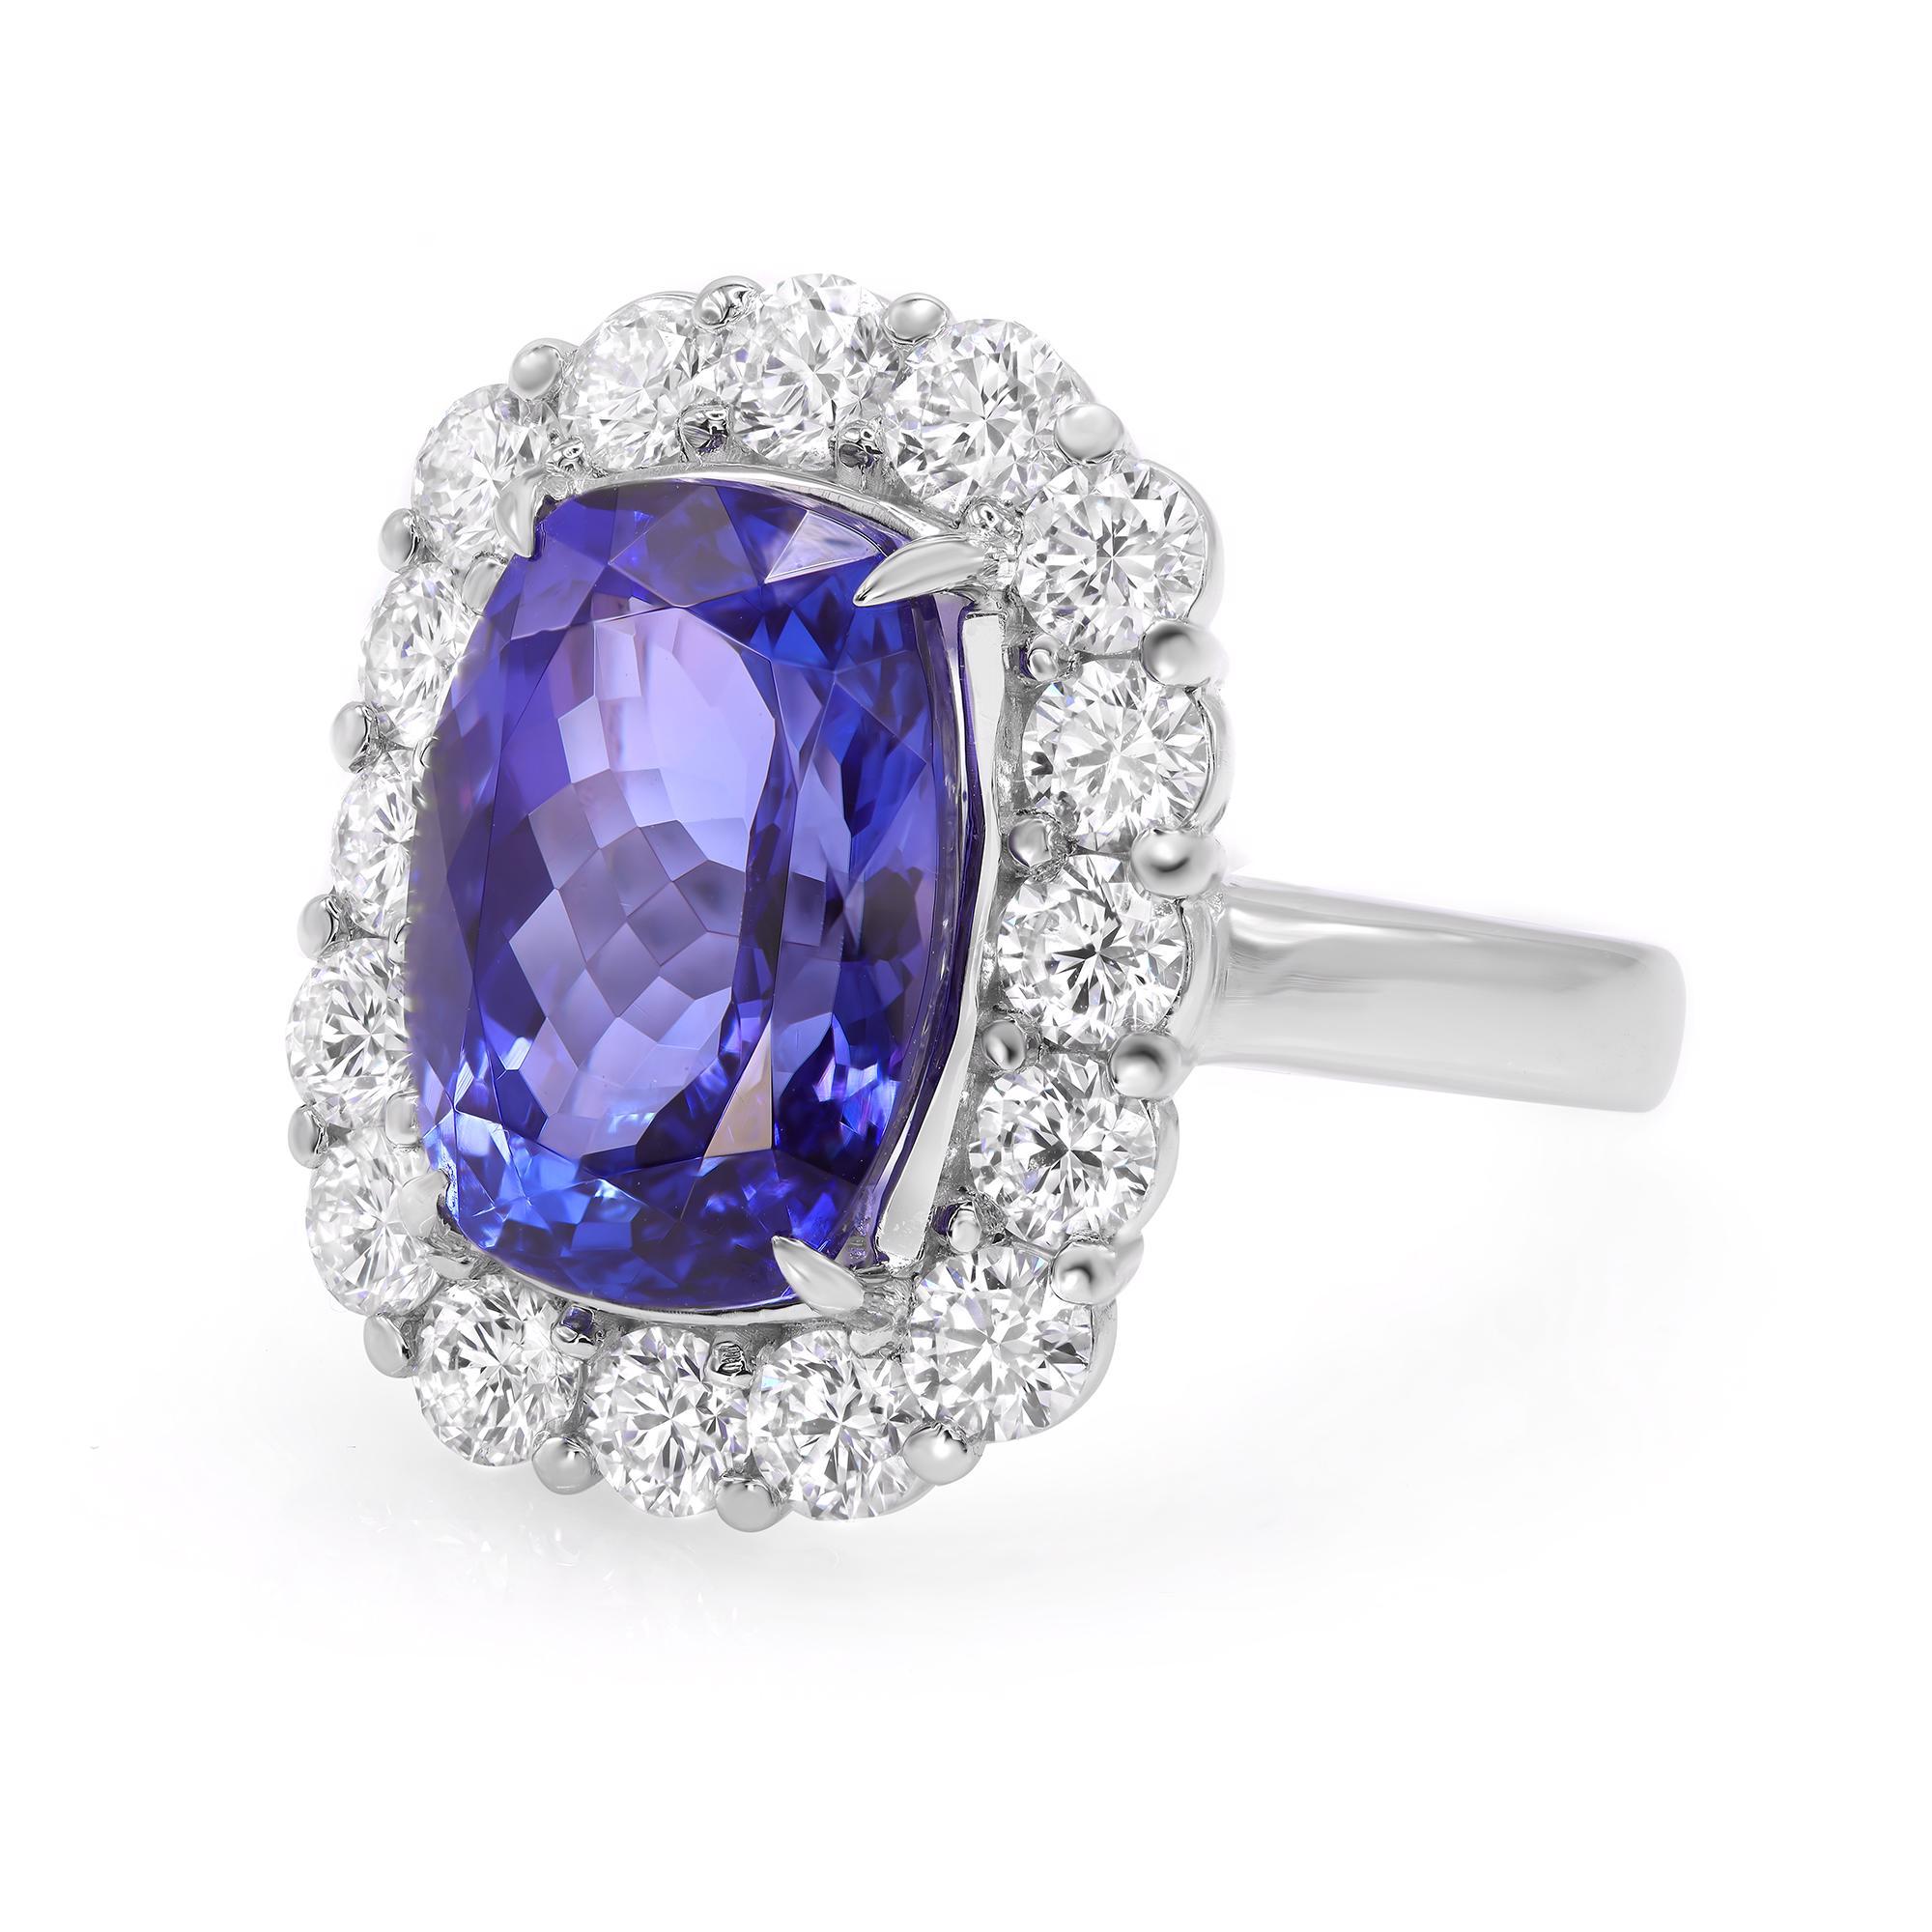 Cushion Cut 7.94cts Natural Tanzanite Diamond Cocktail Ring Platinum In New Condition For Sale In New York, NY